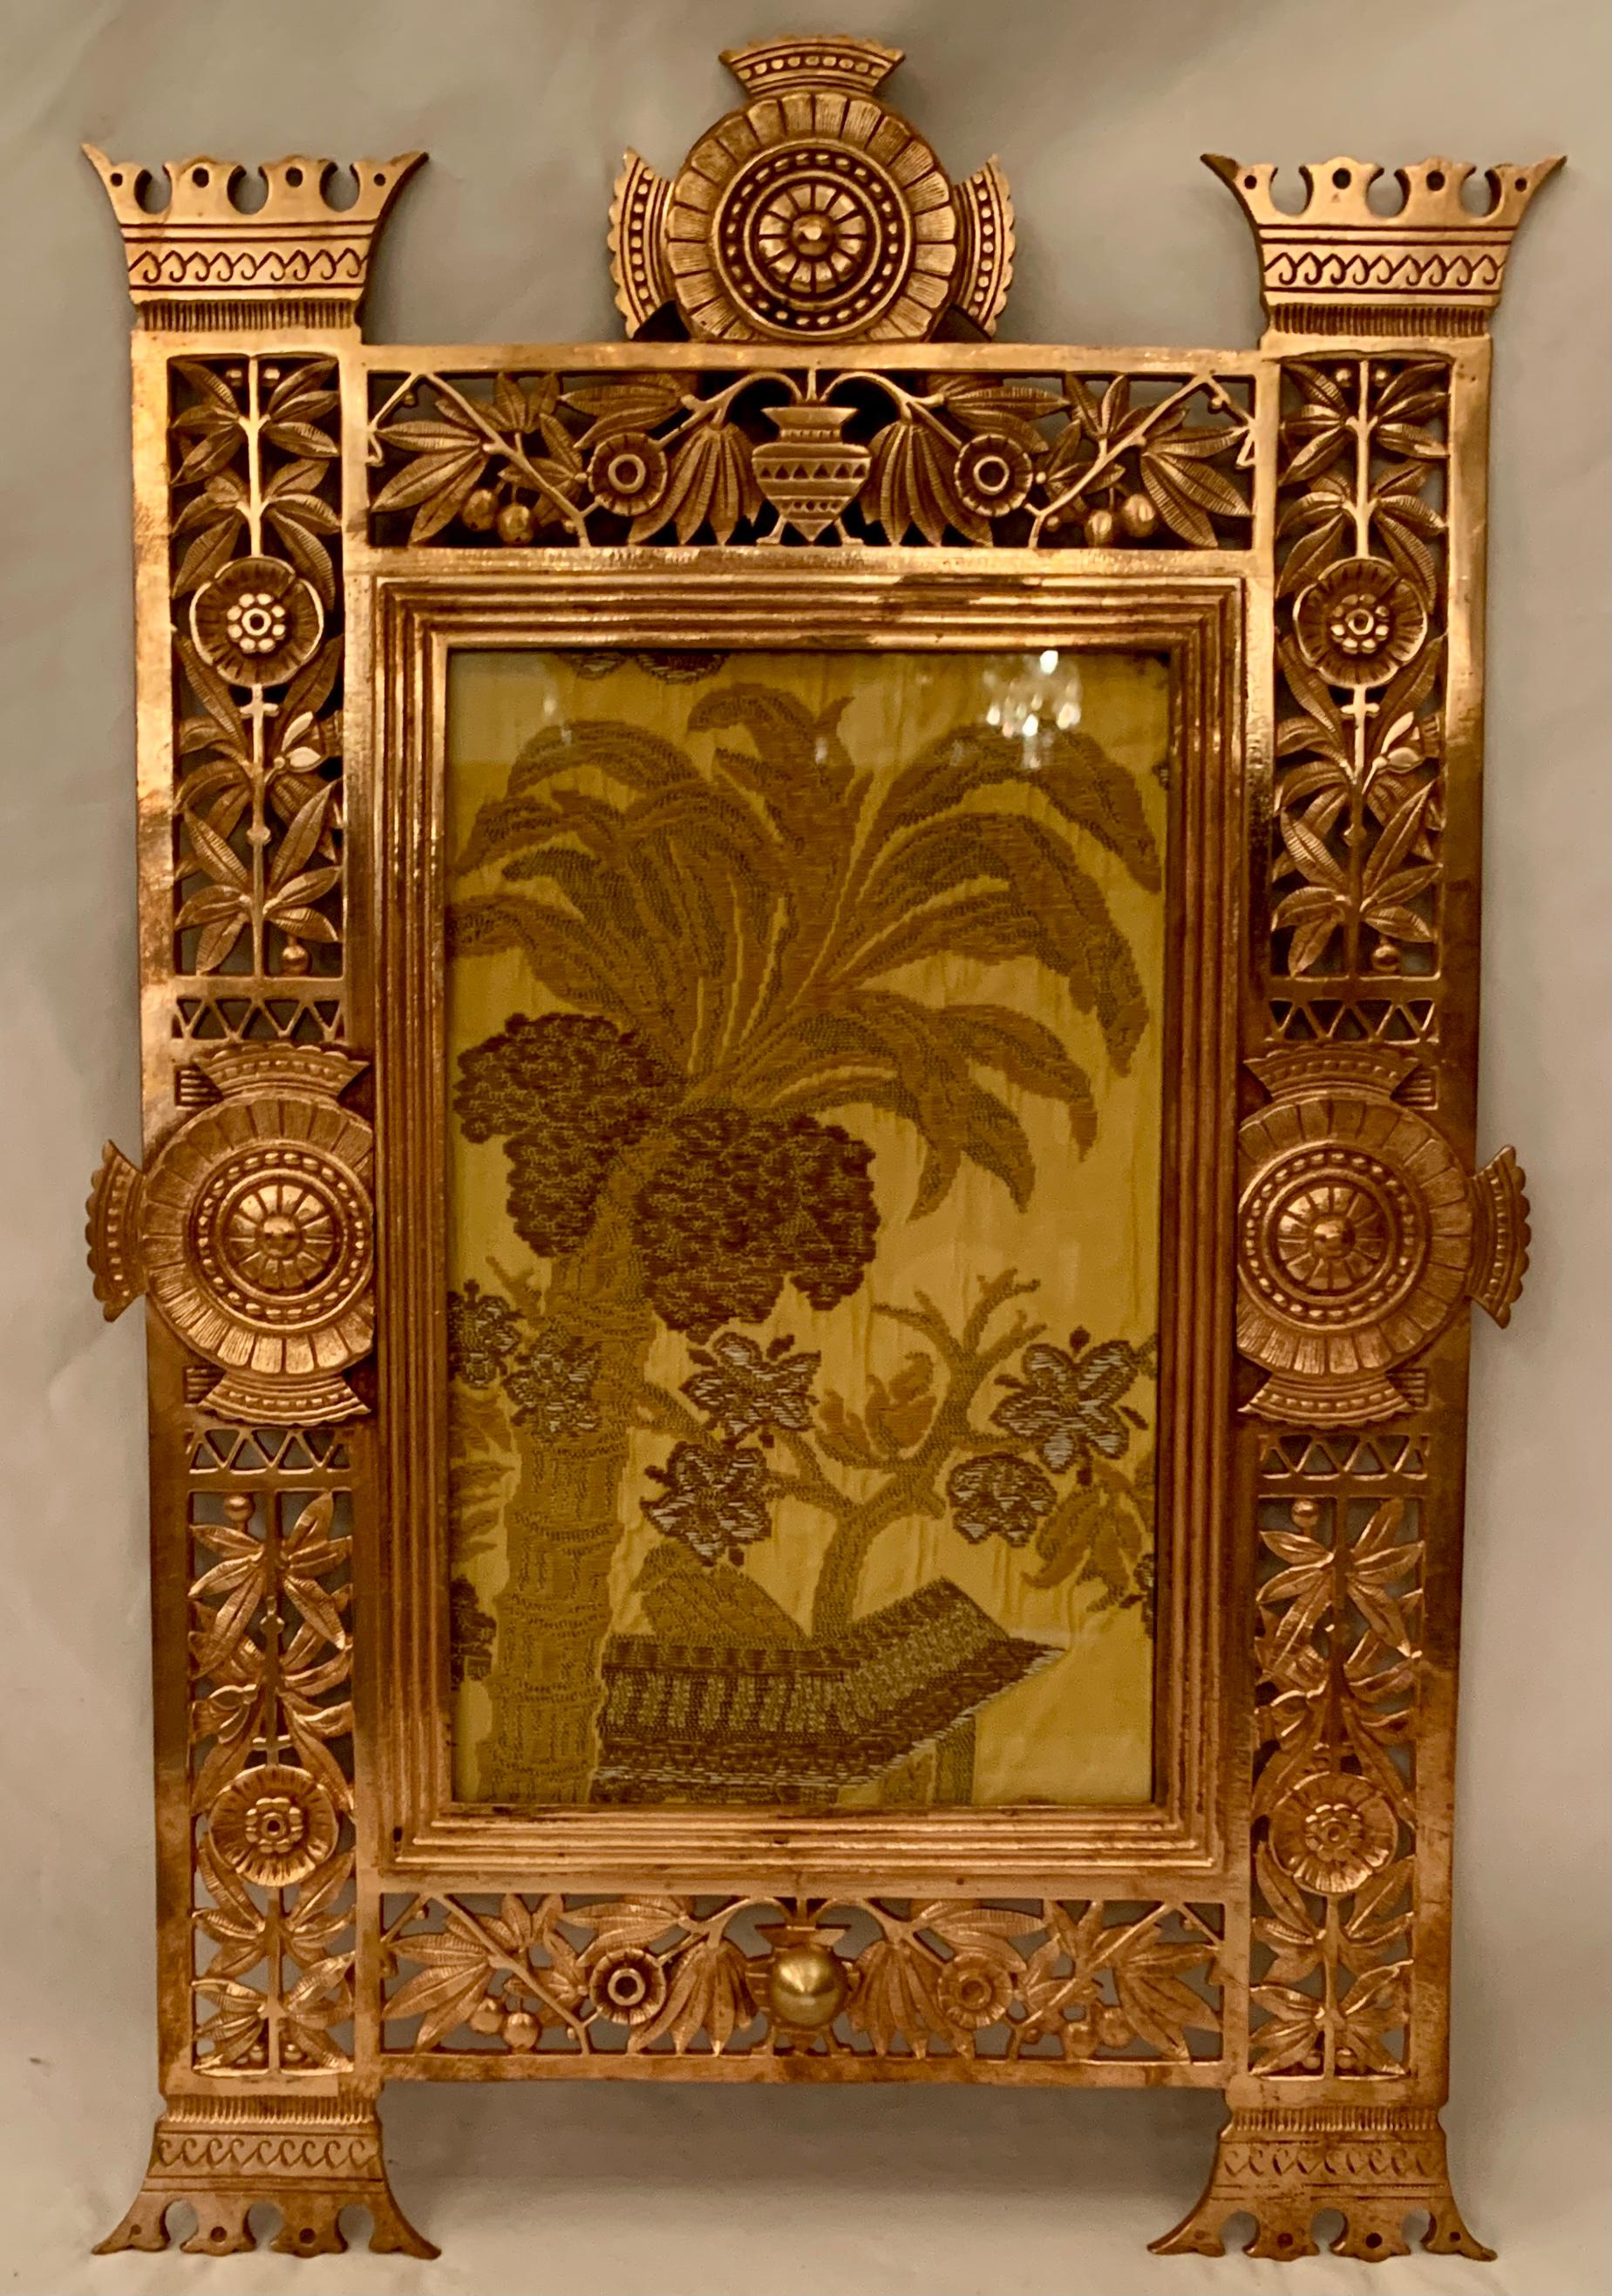 Antique American Art Deco Gold Bronze Hanging Picture Frame, Circa 1920-1930 For Sale 1